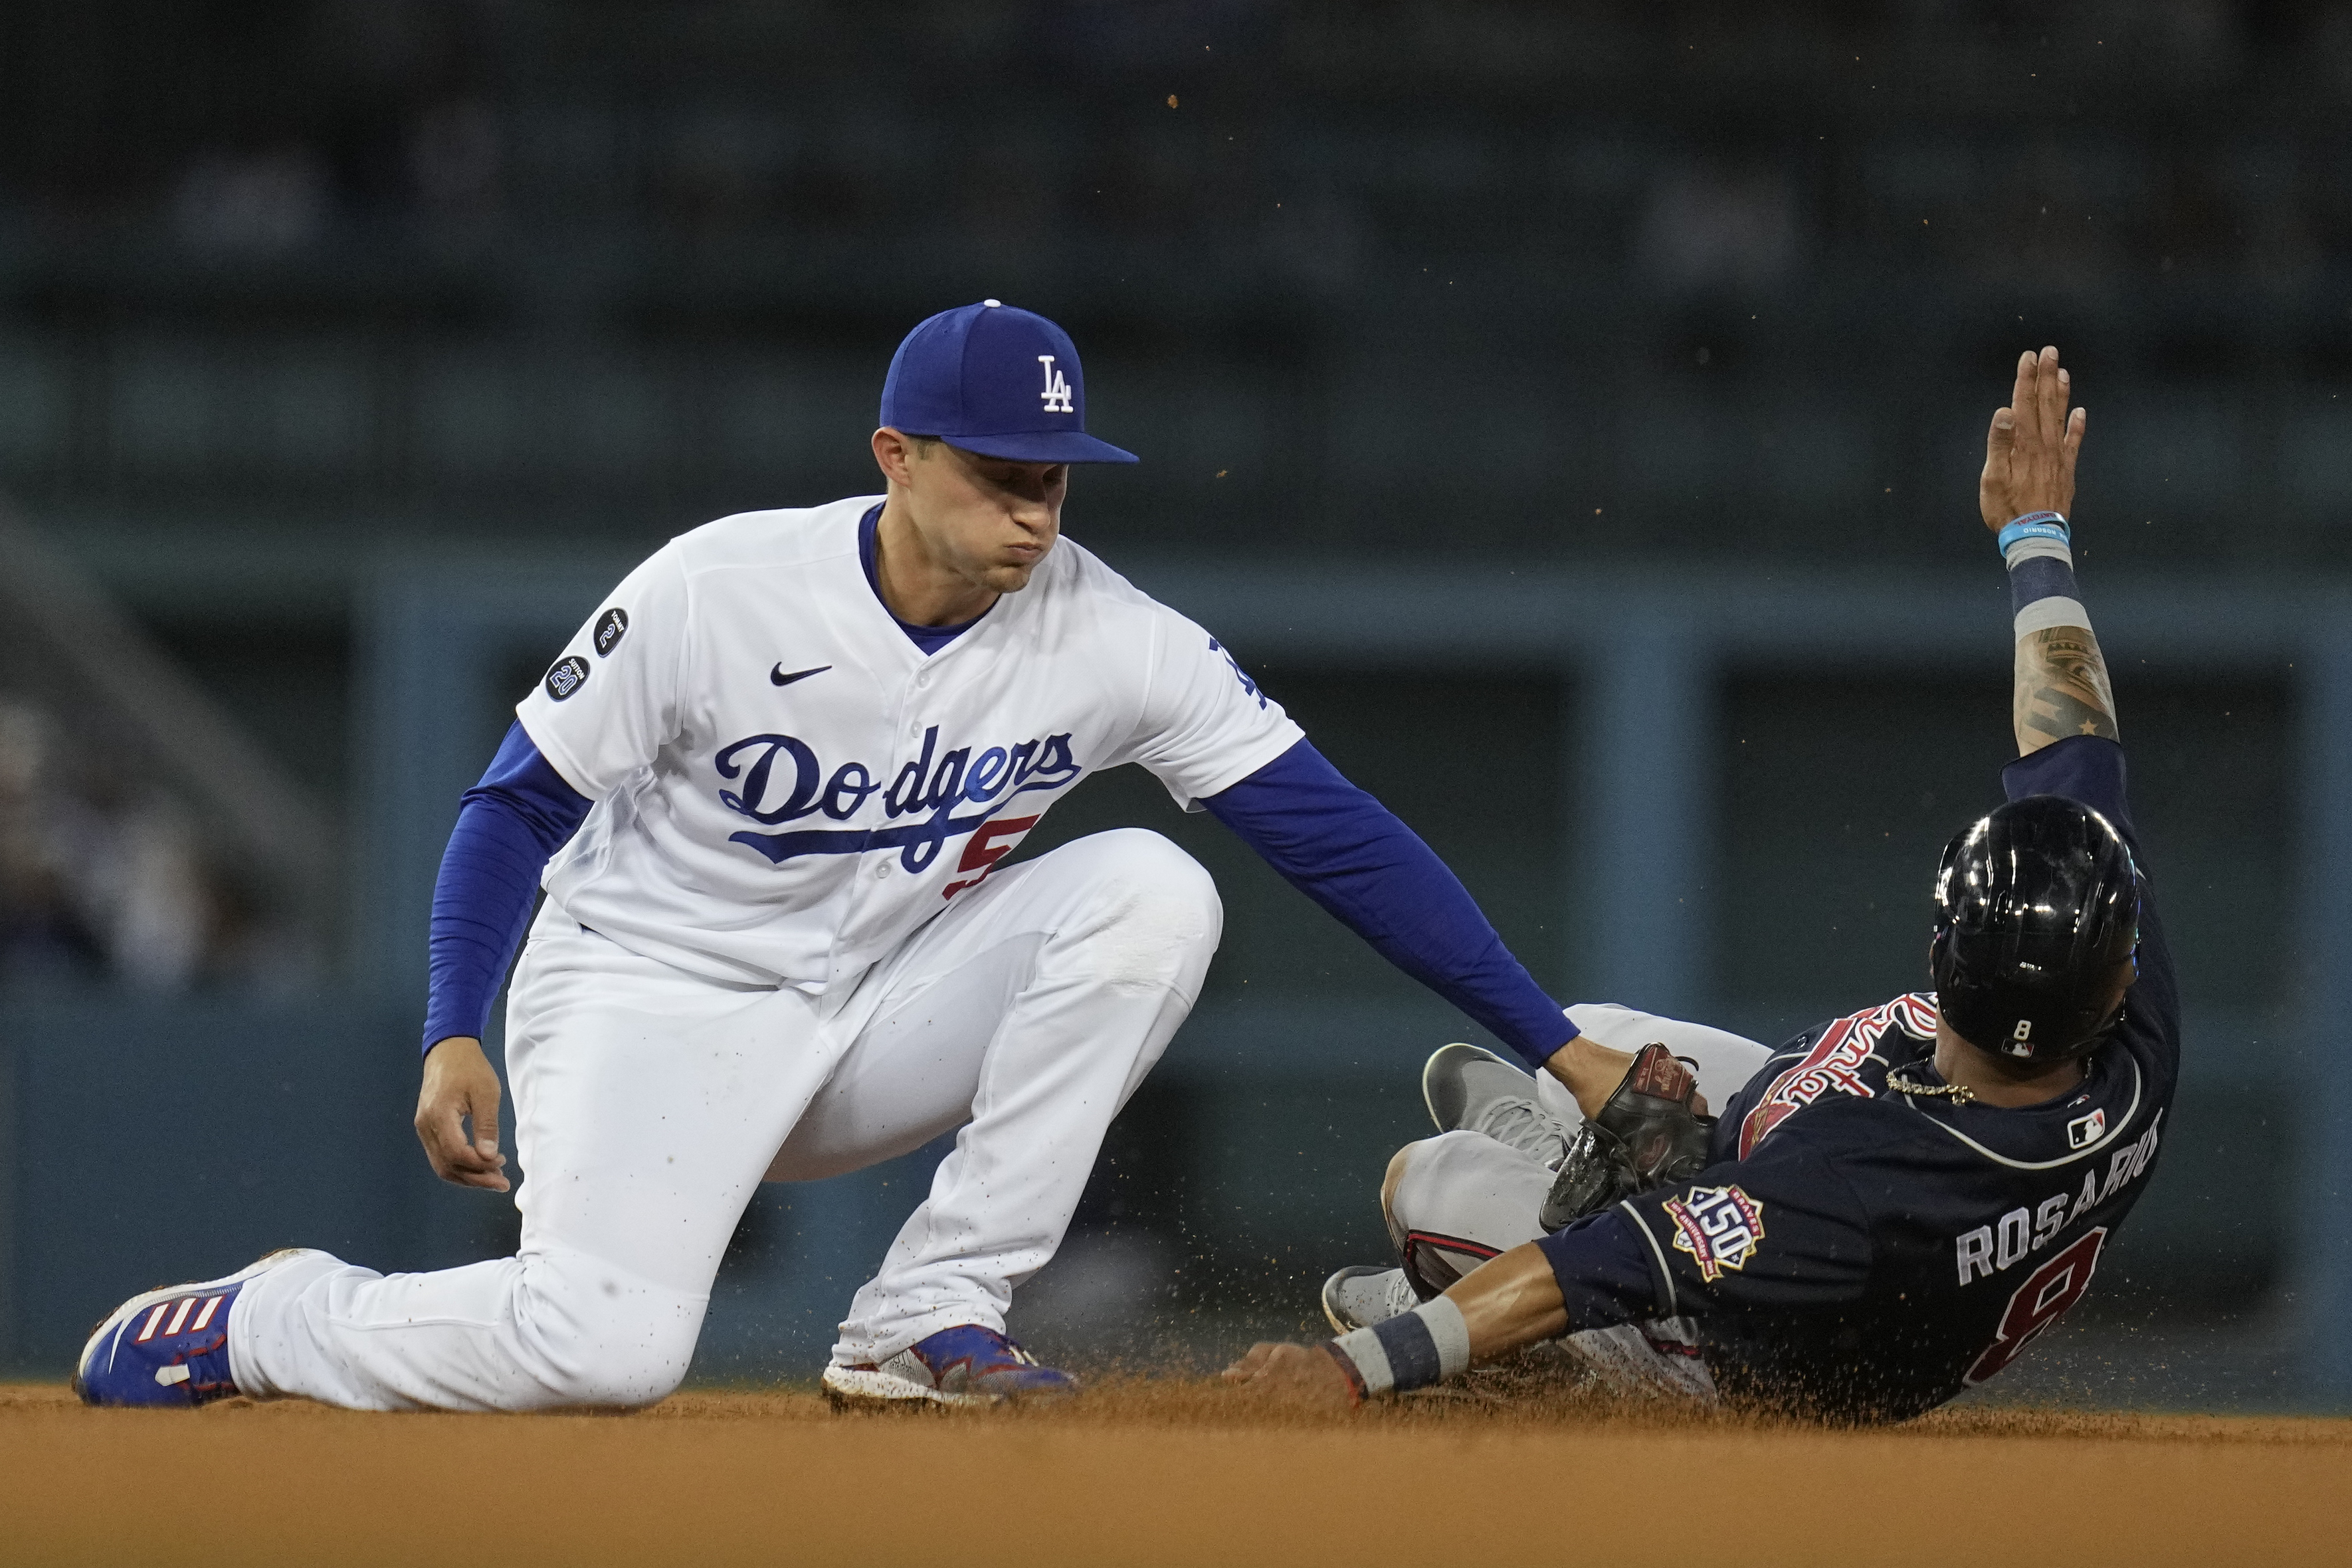 5 teams most likely to steal Corey Seager from the Dodgers